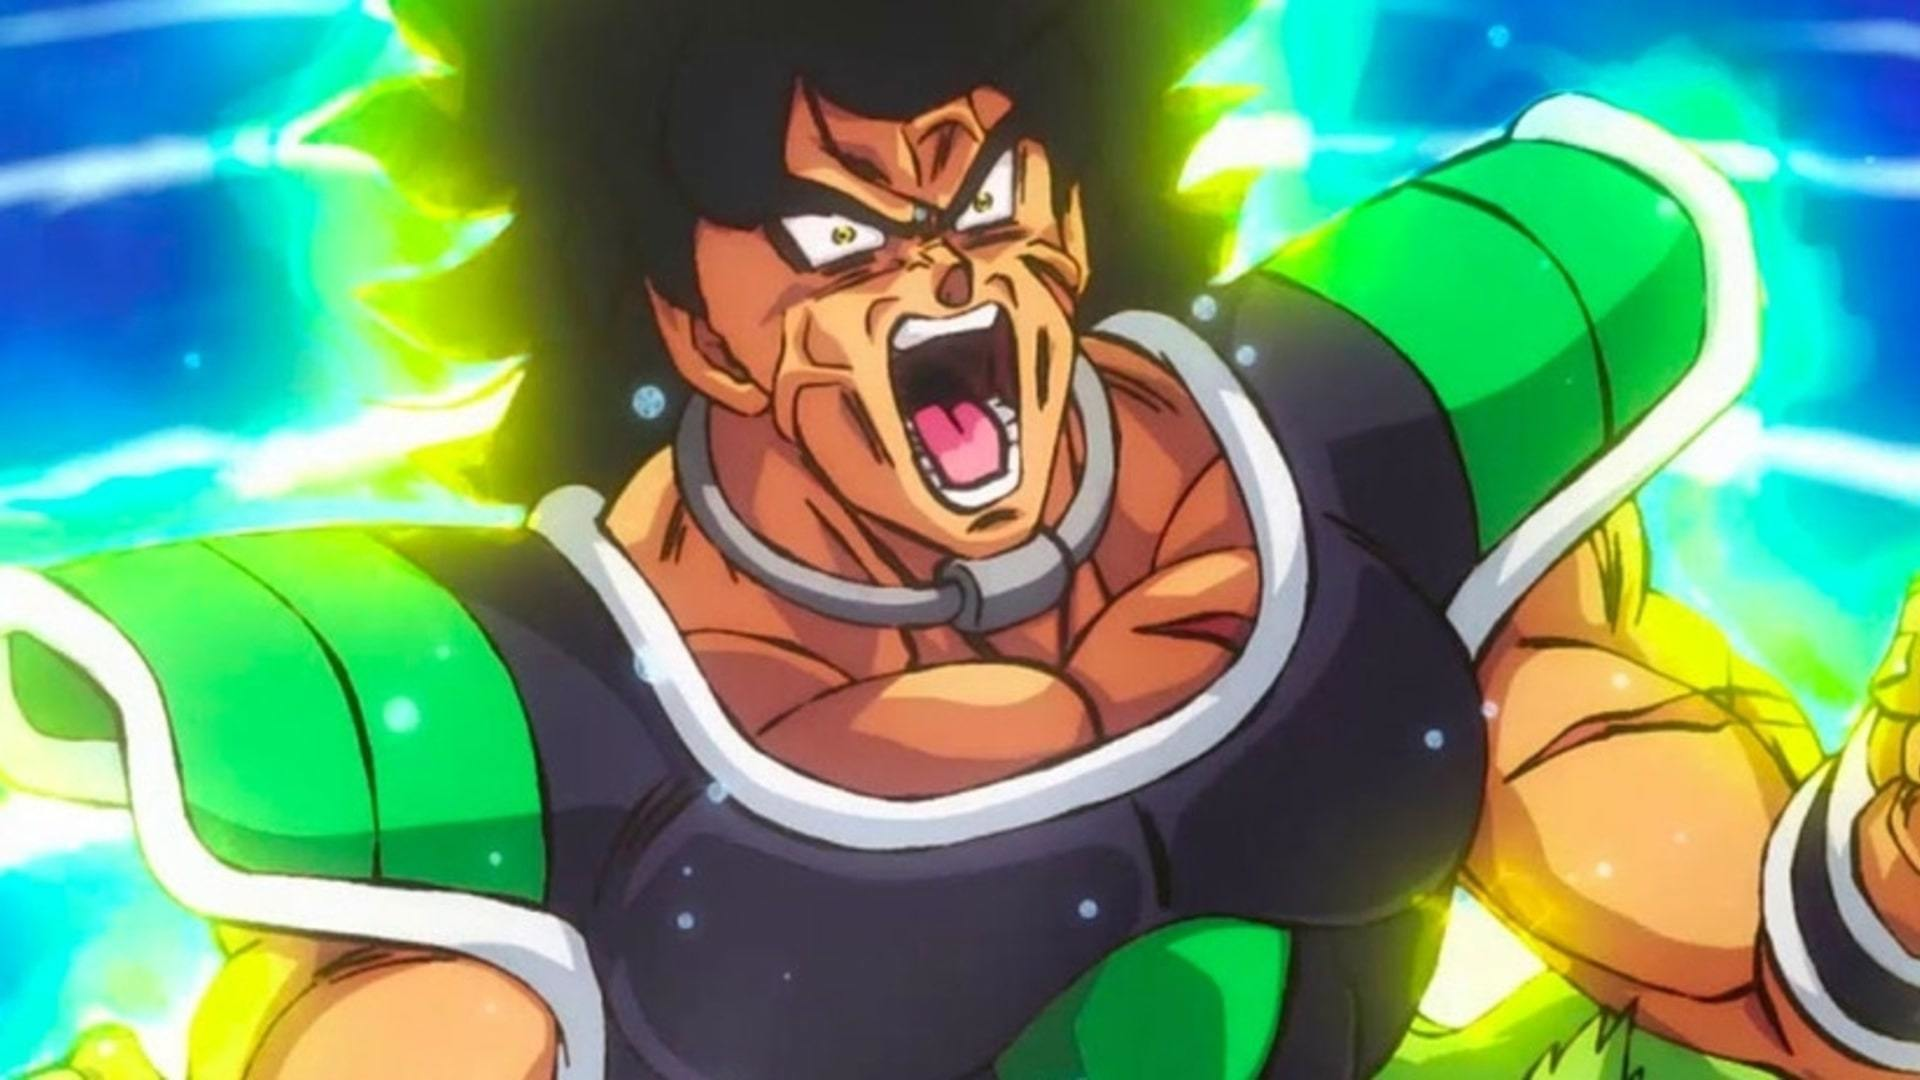 In your opinion, is Broly's Wrath state the Dragon Ball Super